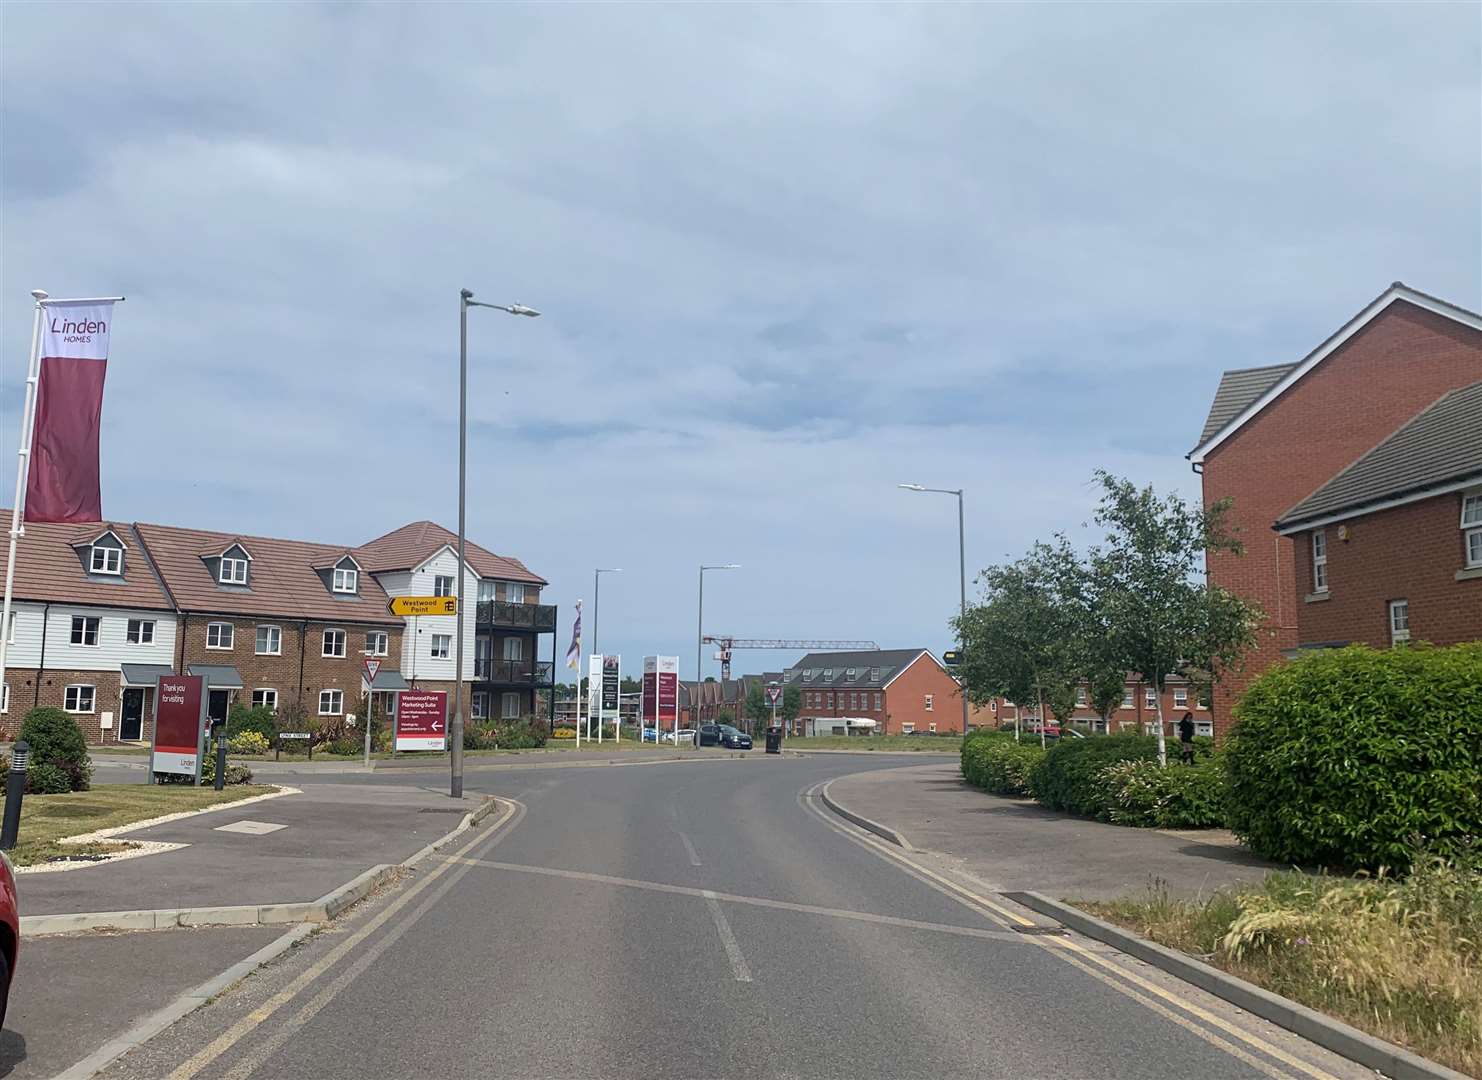 A motion seeking to pause developments of 10 homes or more across Thanet is being considered